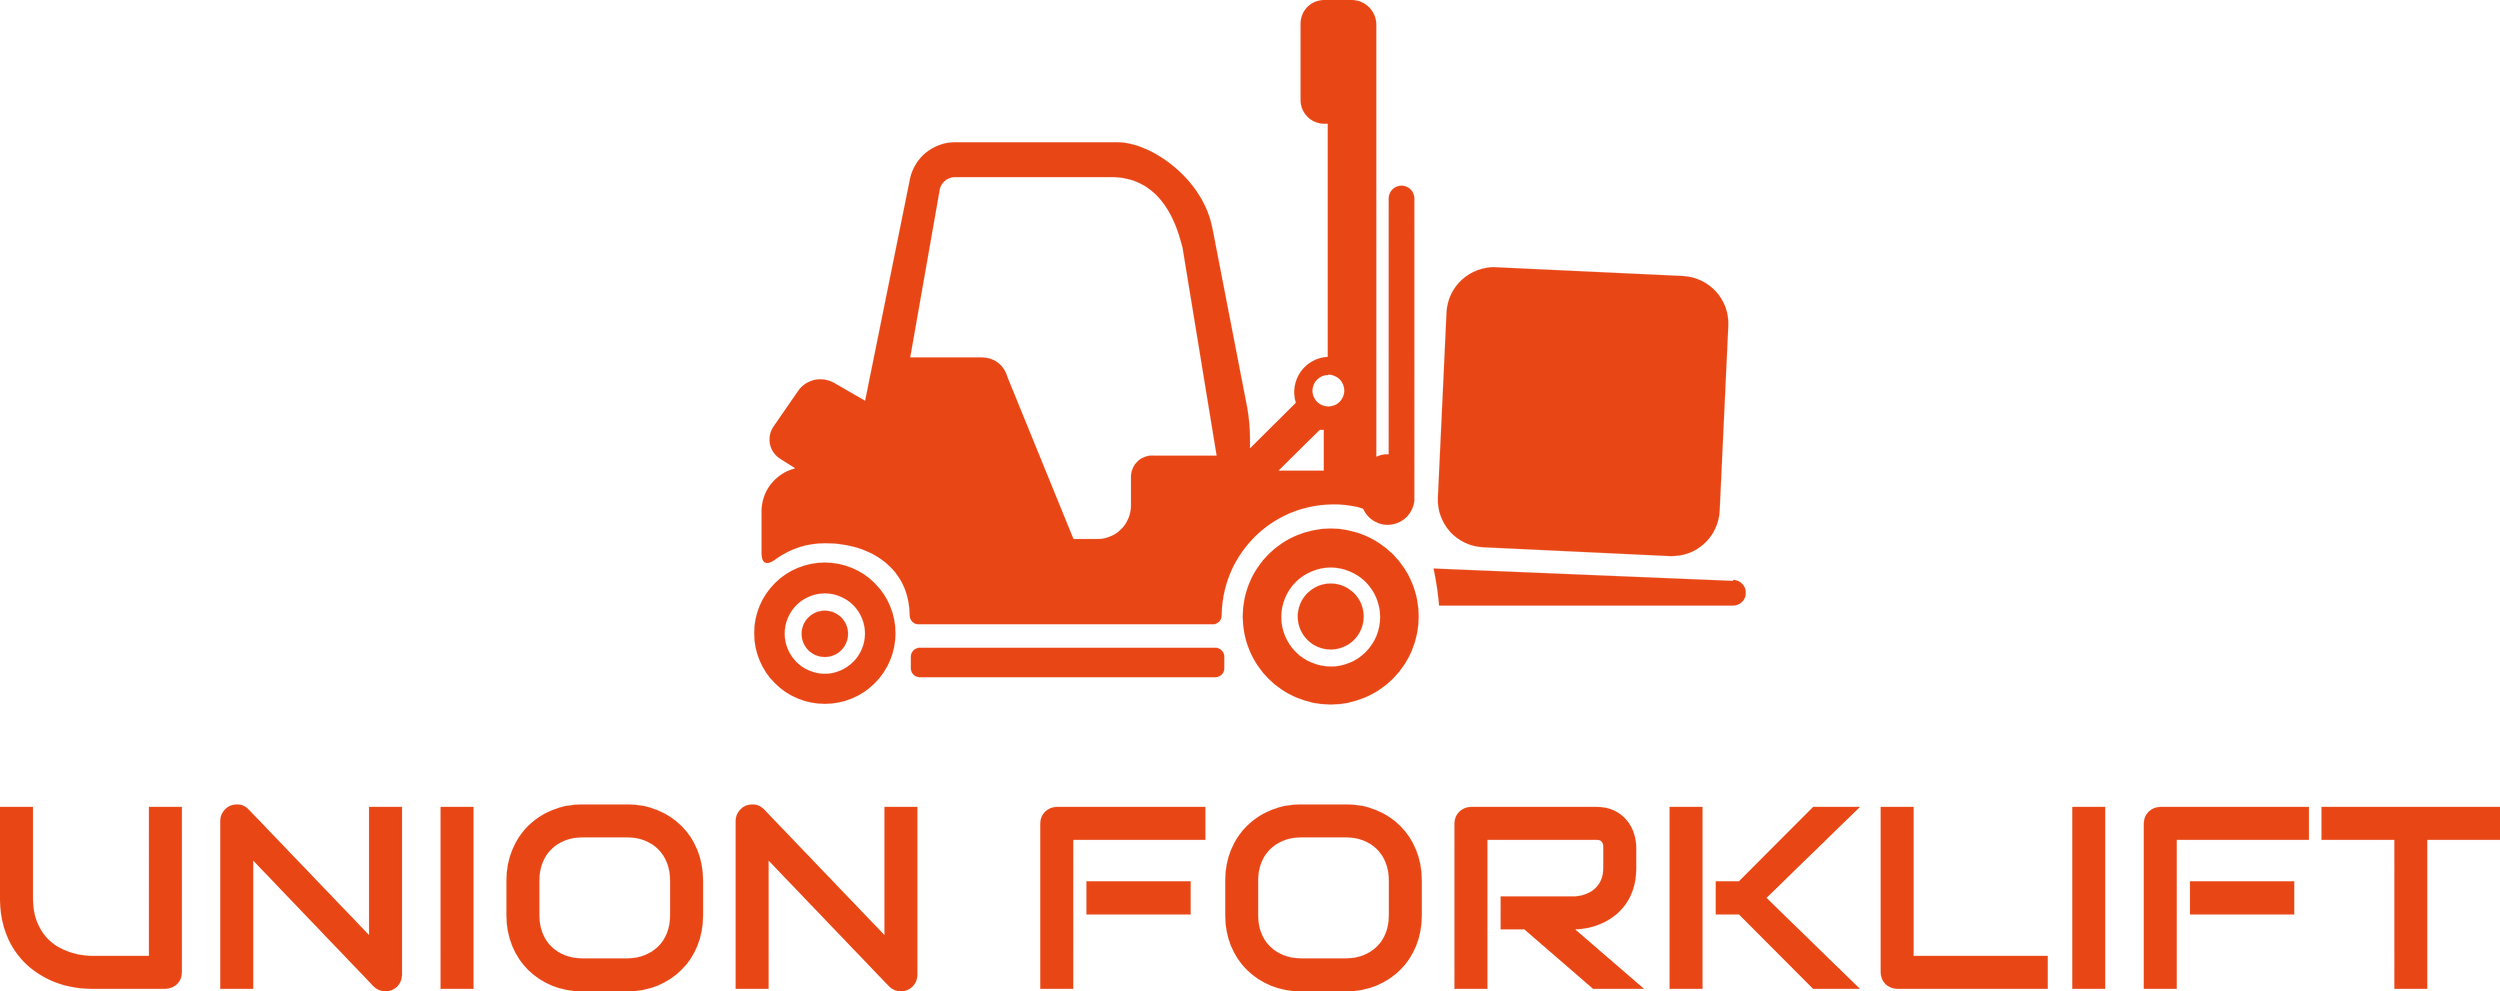 Top Forklift Services in Singapore for Efficient Material Handling